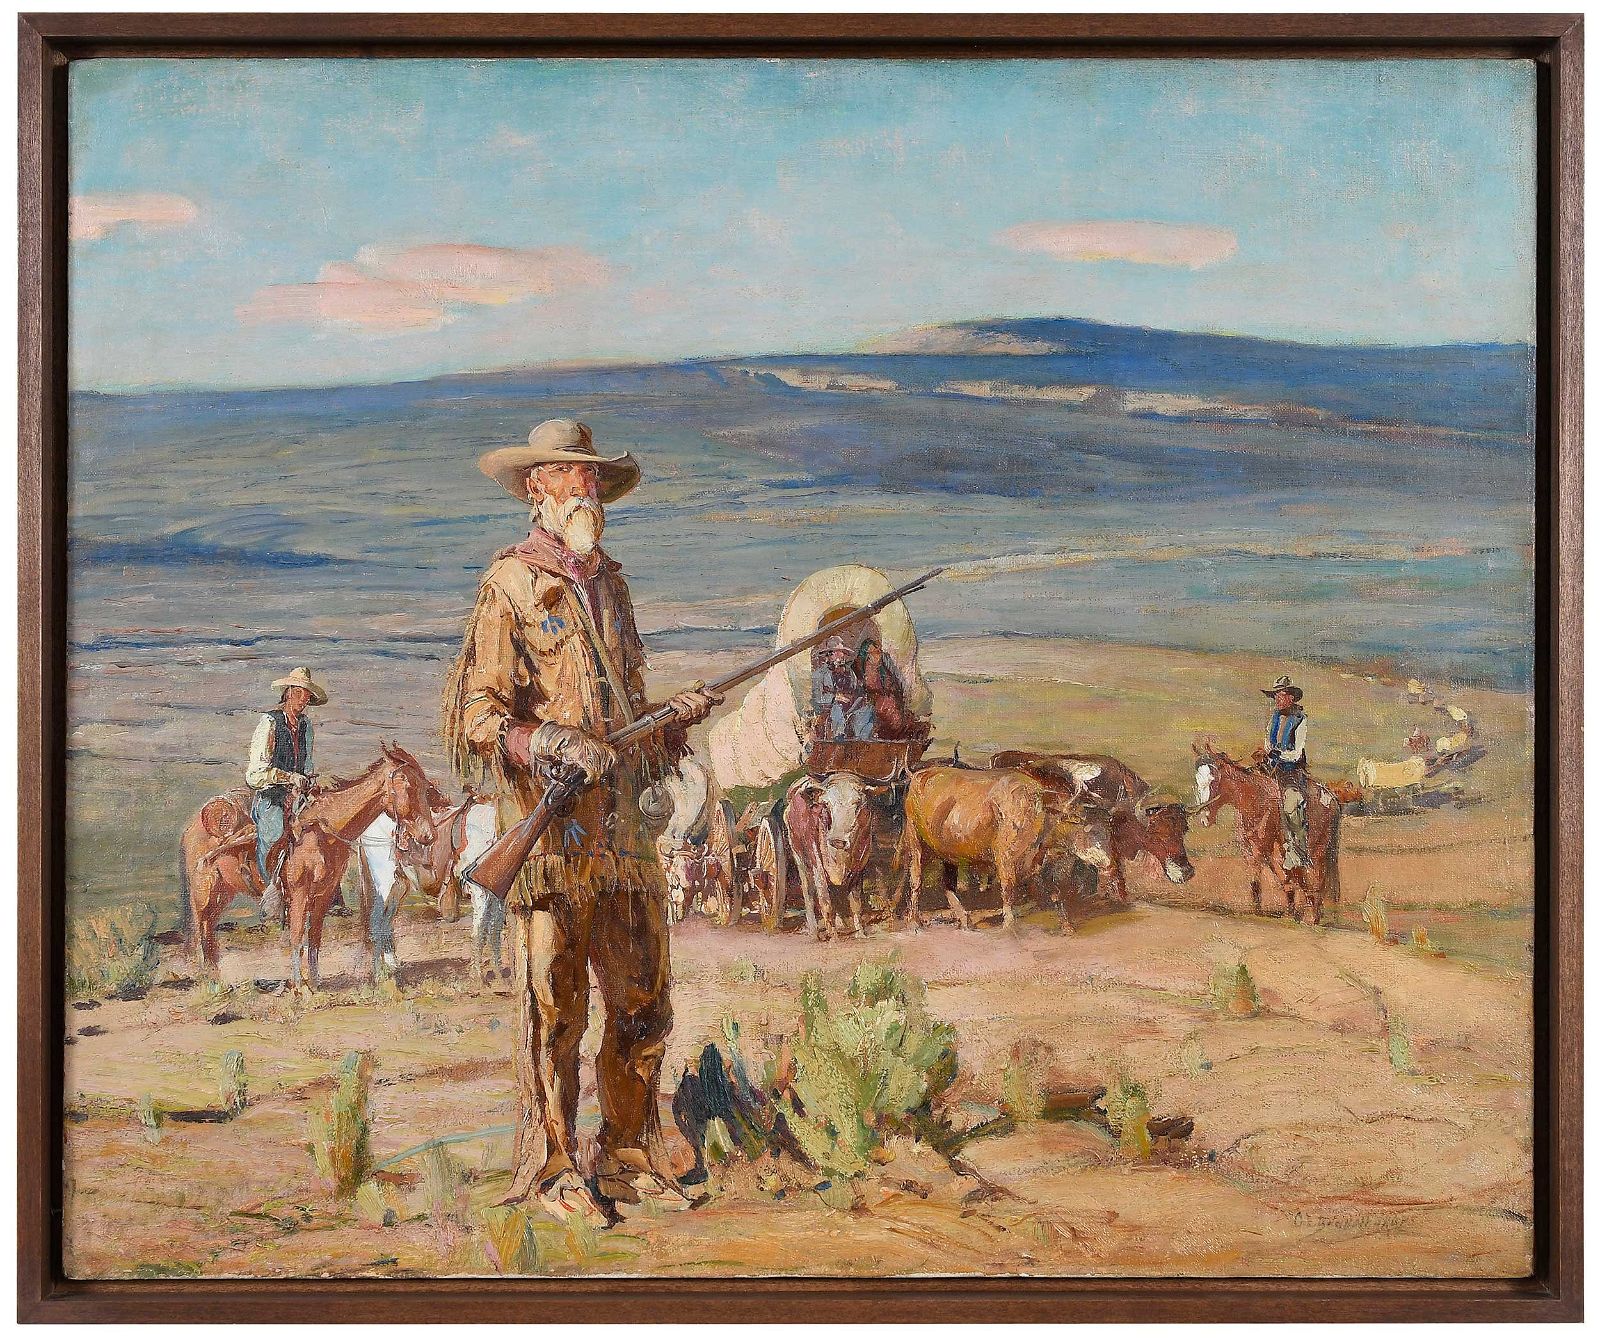 ‘Scout of the Caravan’ by Oscar Edmund Berninghaus, which hammered for $42,000 and sold for $53,760 with buyer’s premium at Brunk Auctions.